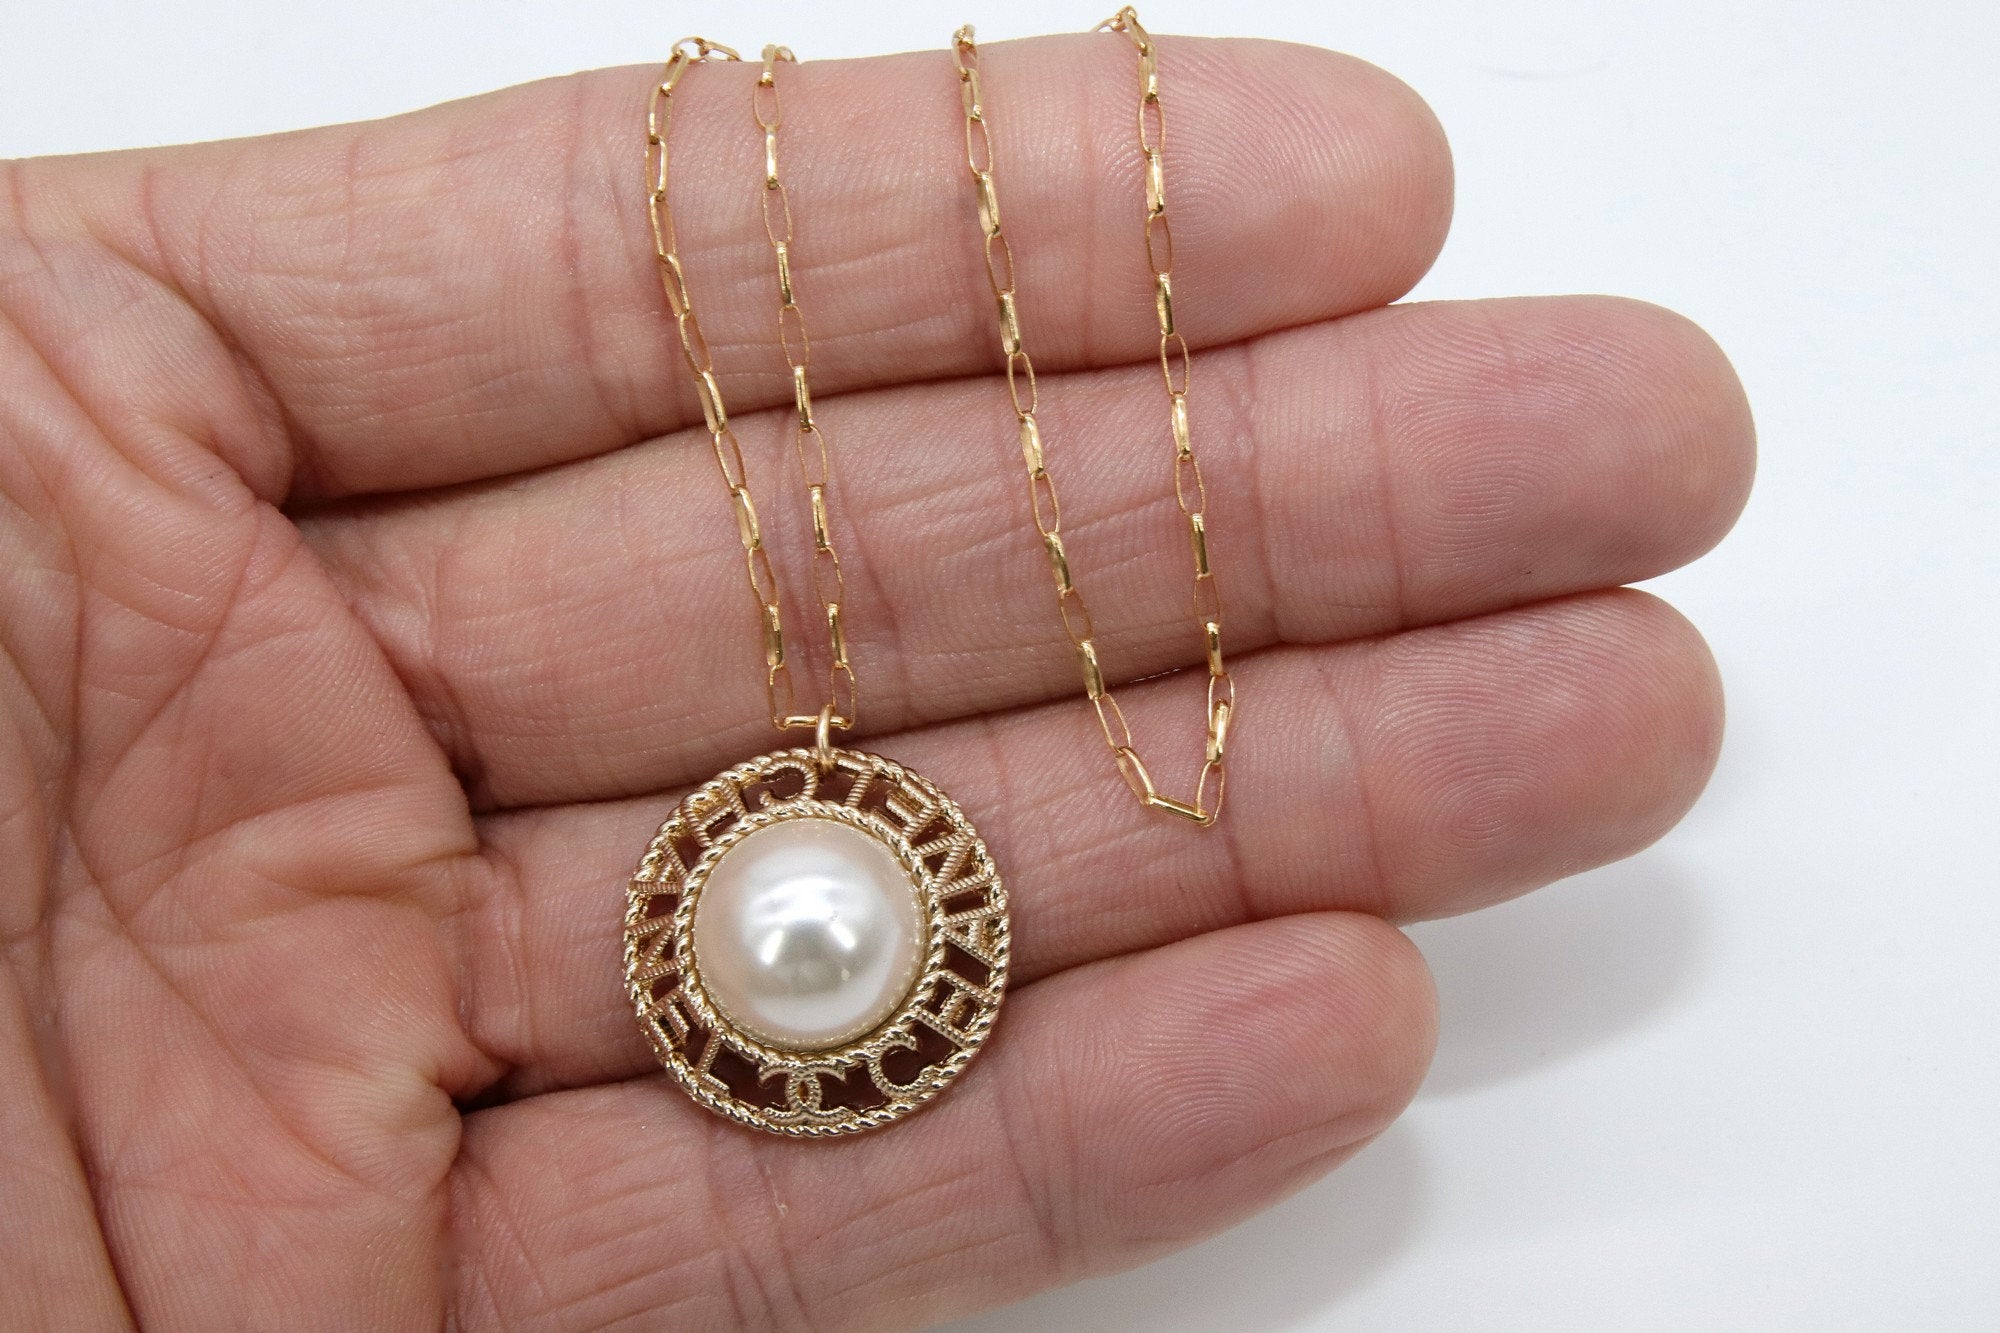 14 K Gold Filled Rolo Drawn Chain Necklace, Repurposed Vintage Button Necklace, Gold Round Channel Pearl Button - A Girls Gems